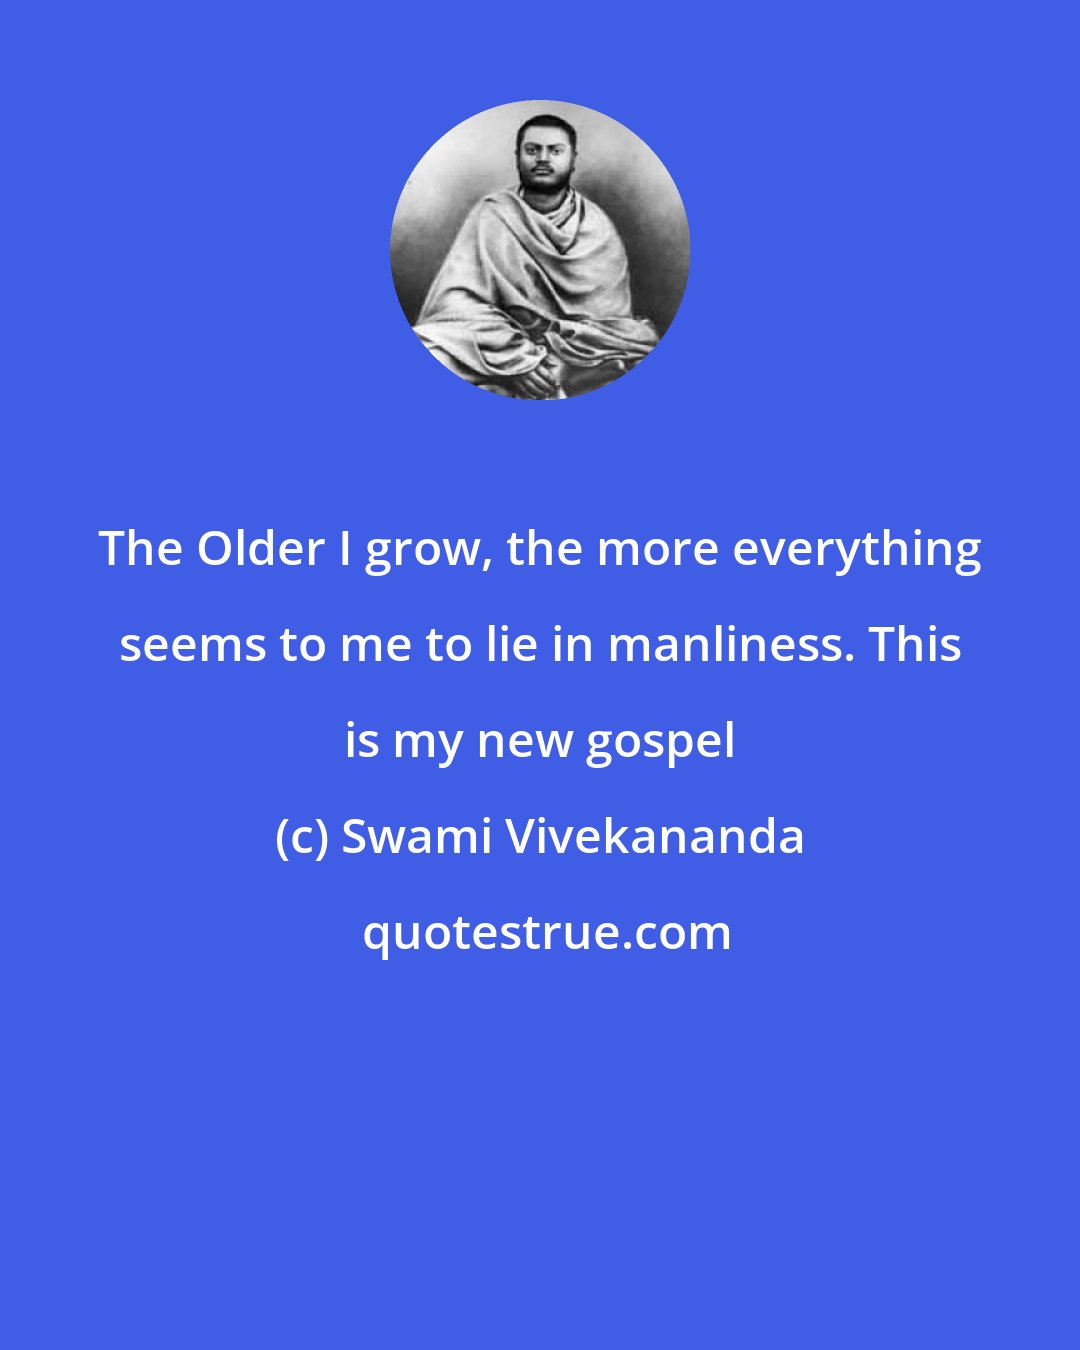 Swami Vivekananda: The Older I grow, the more everything seems to me to lie in manliness. This is my new gospel